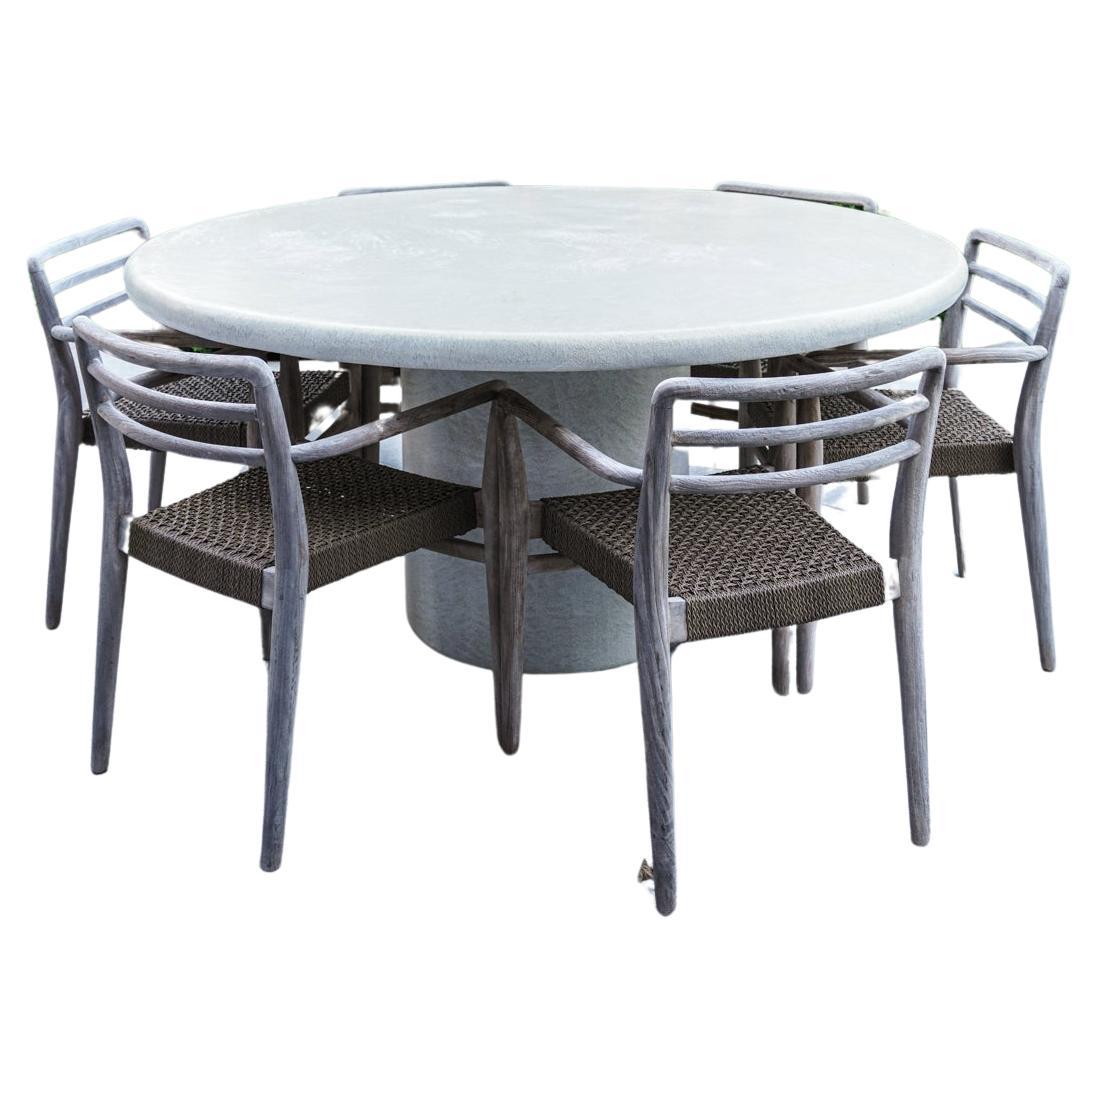 Liz Tables Round Outdoor Boho Table in Mineral Plaster Natural Color For Sale